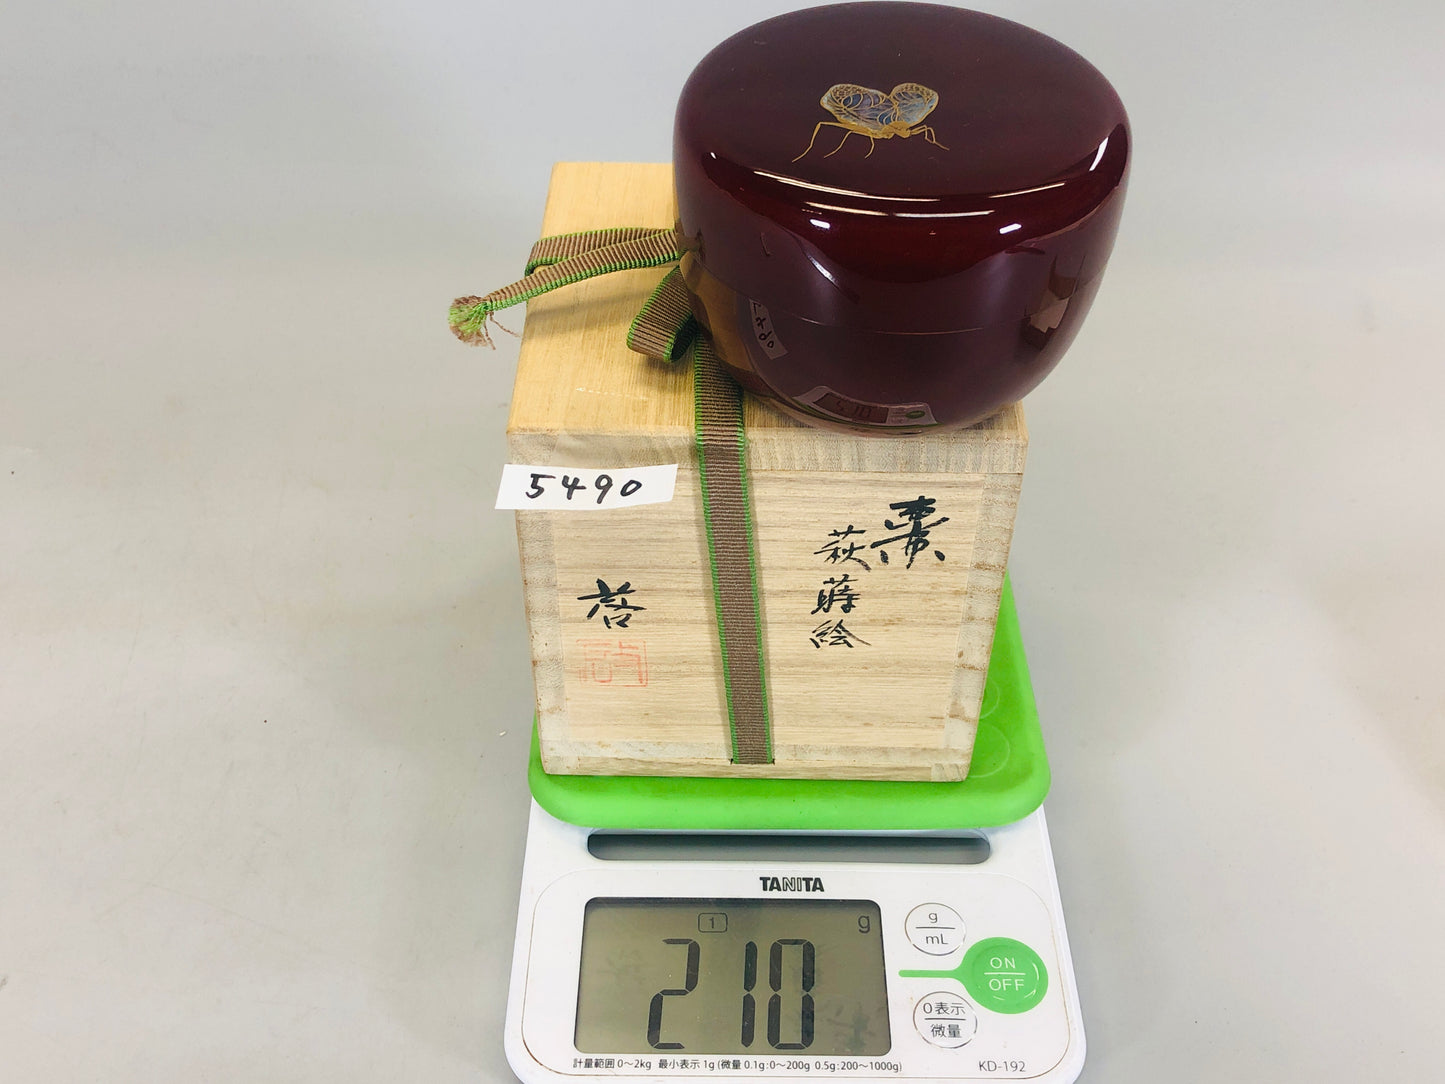 Y5490 NATUME Makie Caddy bell cricket signed box  Japan Tea Ceremony antique